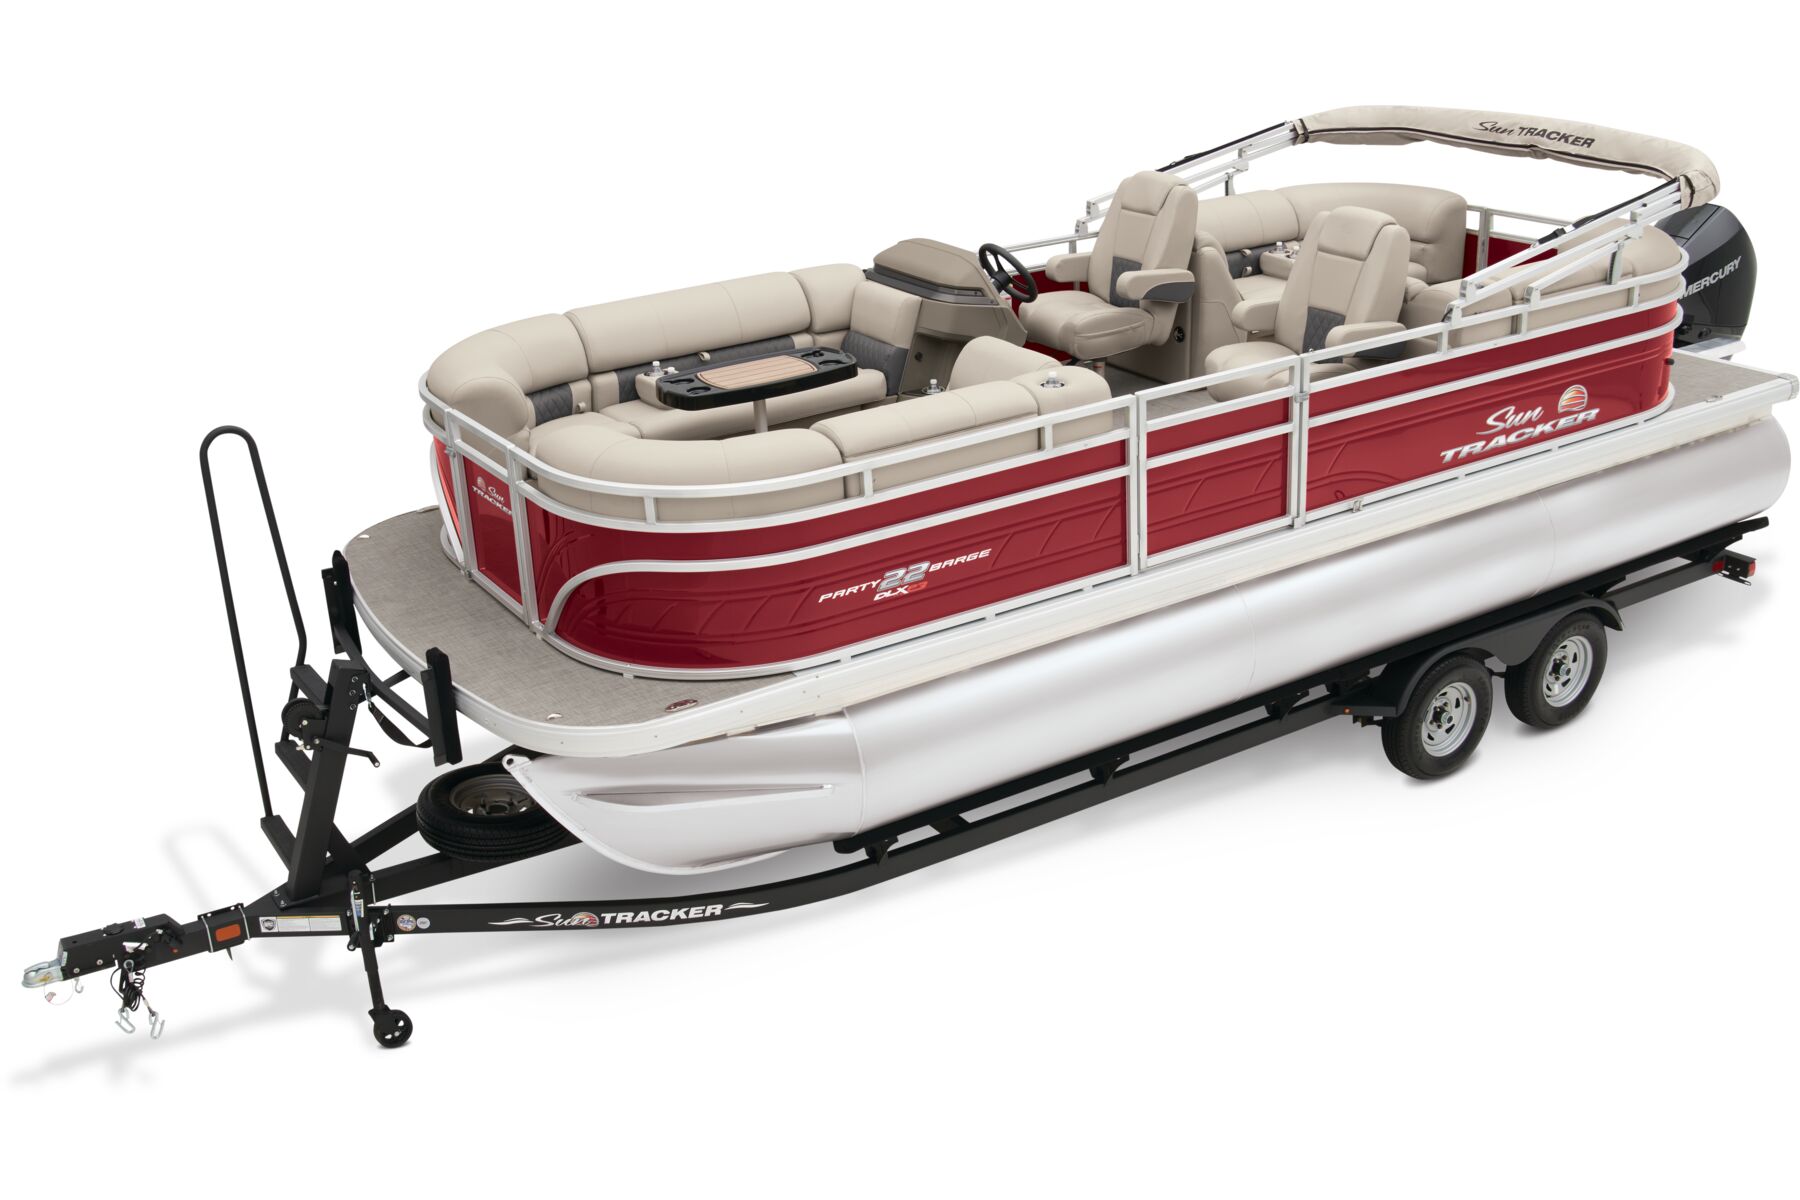 SUN TRACKER Pontoons at Bass Pro and Cabela's Boating Centers